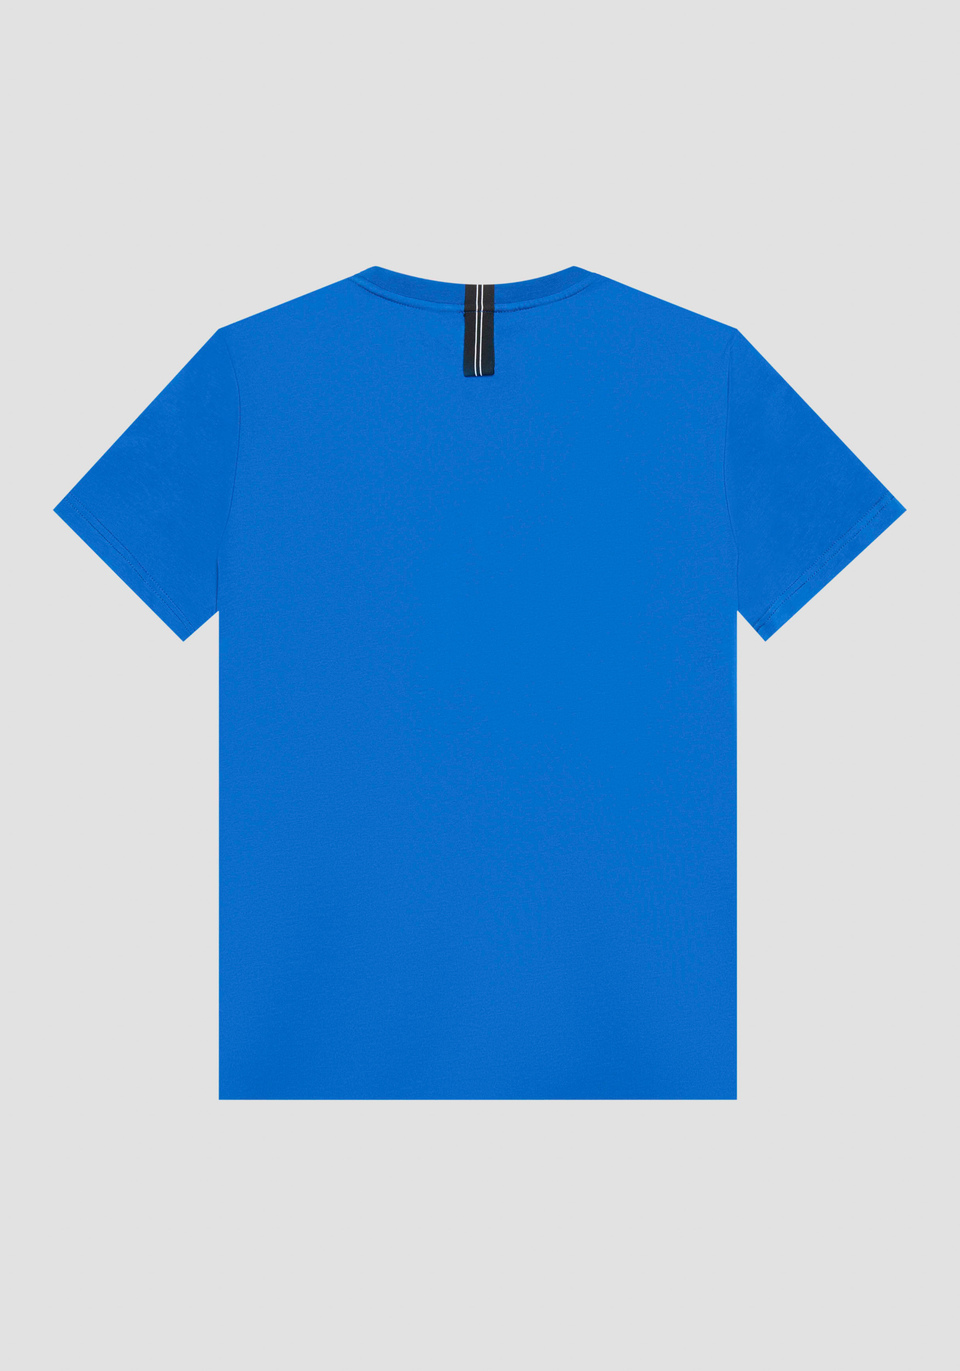 SLIM FIT T-SHIRT IN COTTON WITH INJECTION-MOLDED RUBBER LOGO PRINT - Antony Morato Online Shop